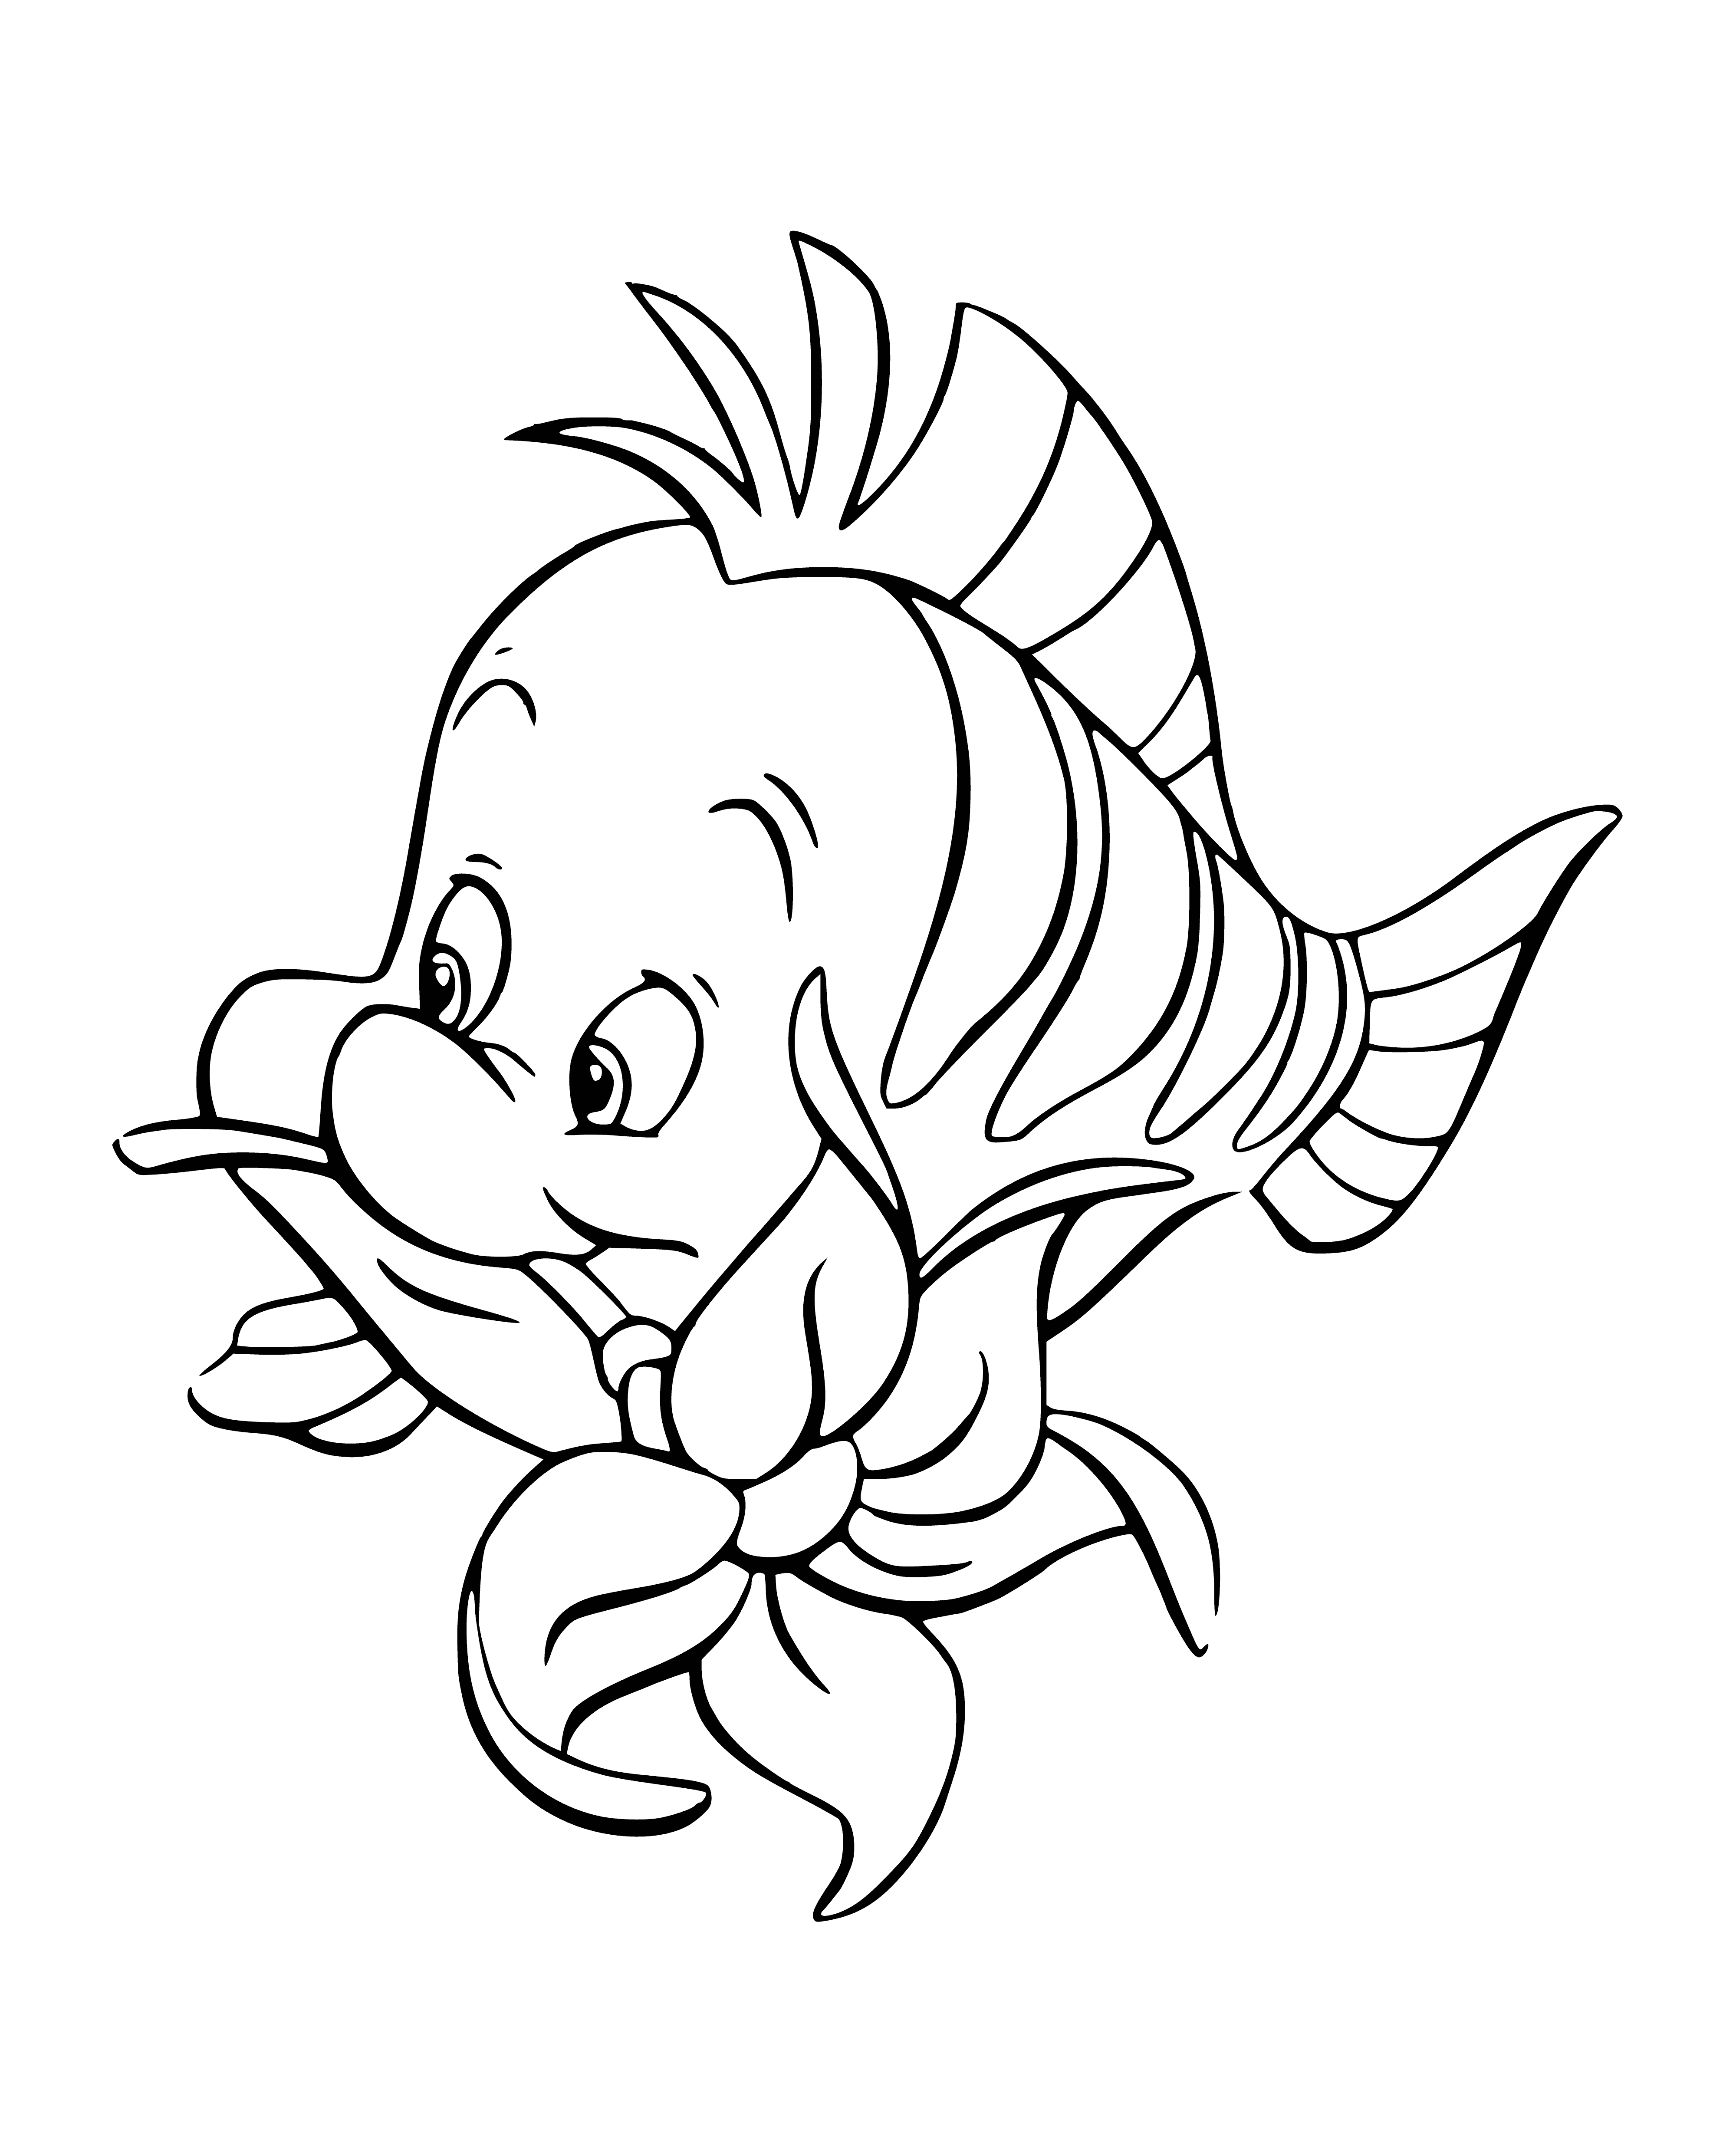 Flounder coloring page